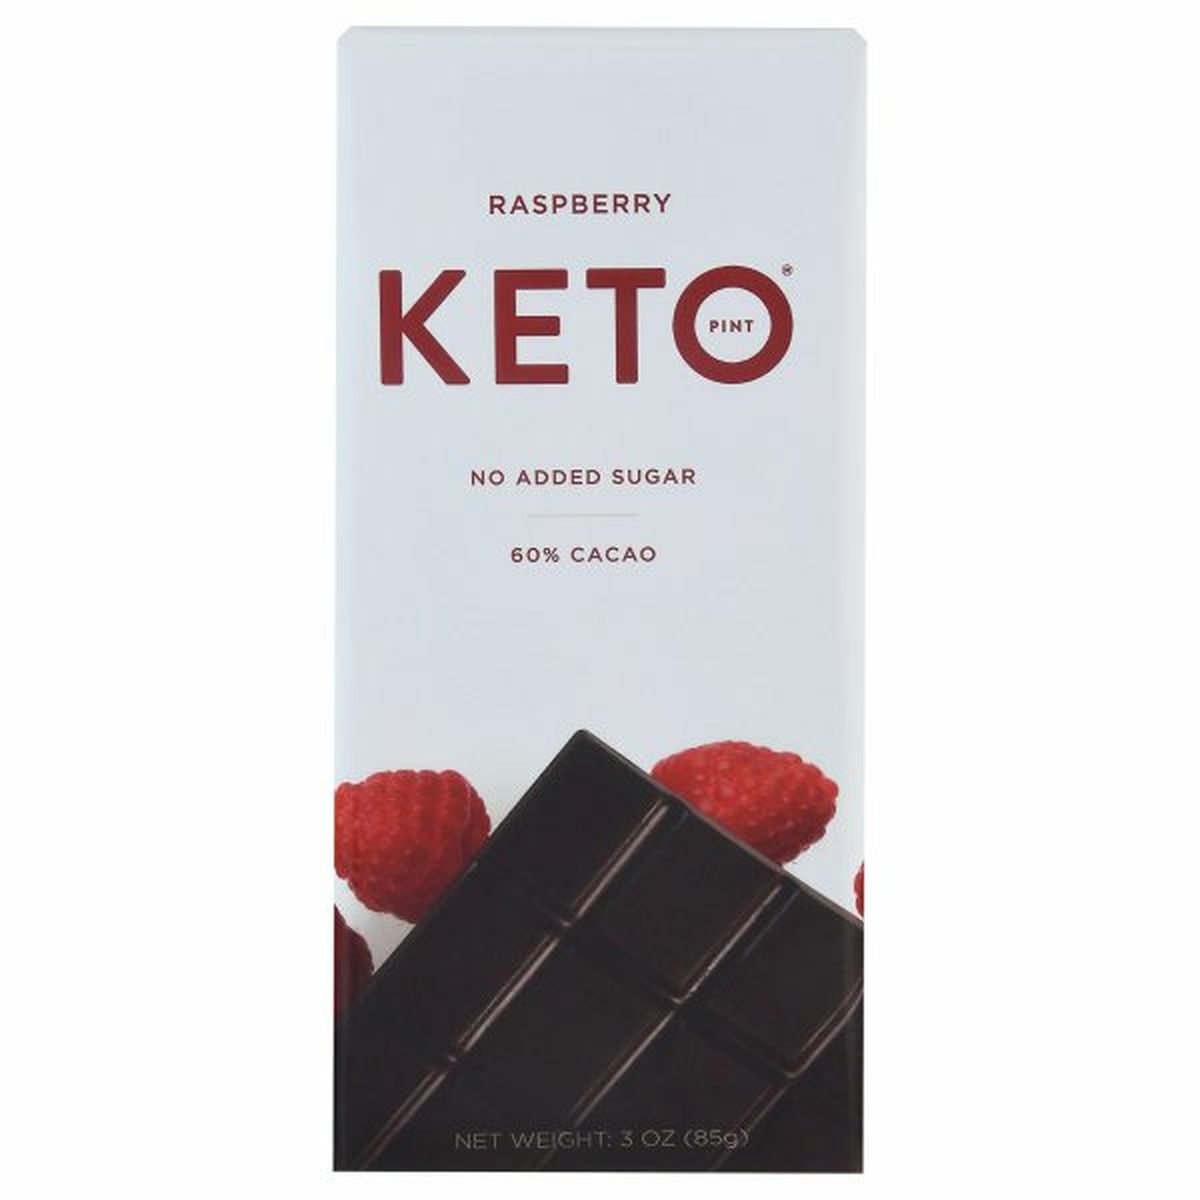 Calories in Keto Pint Chocolate, Raspberry, 60% Cacao